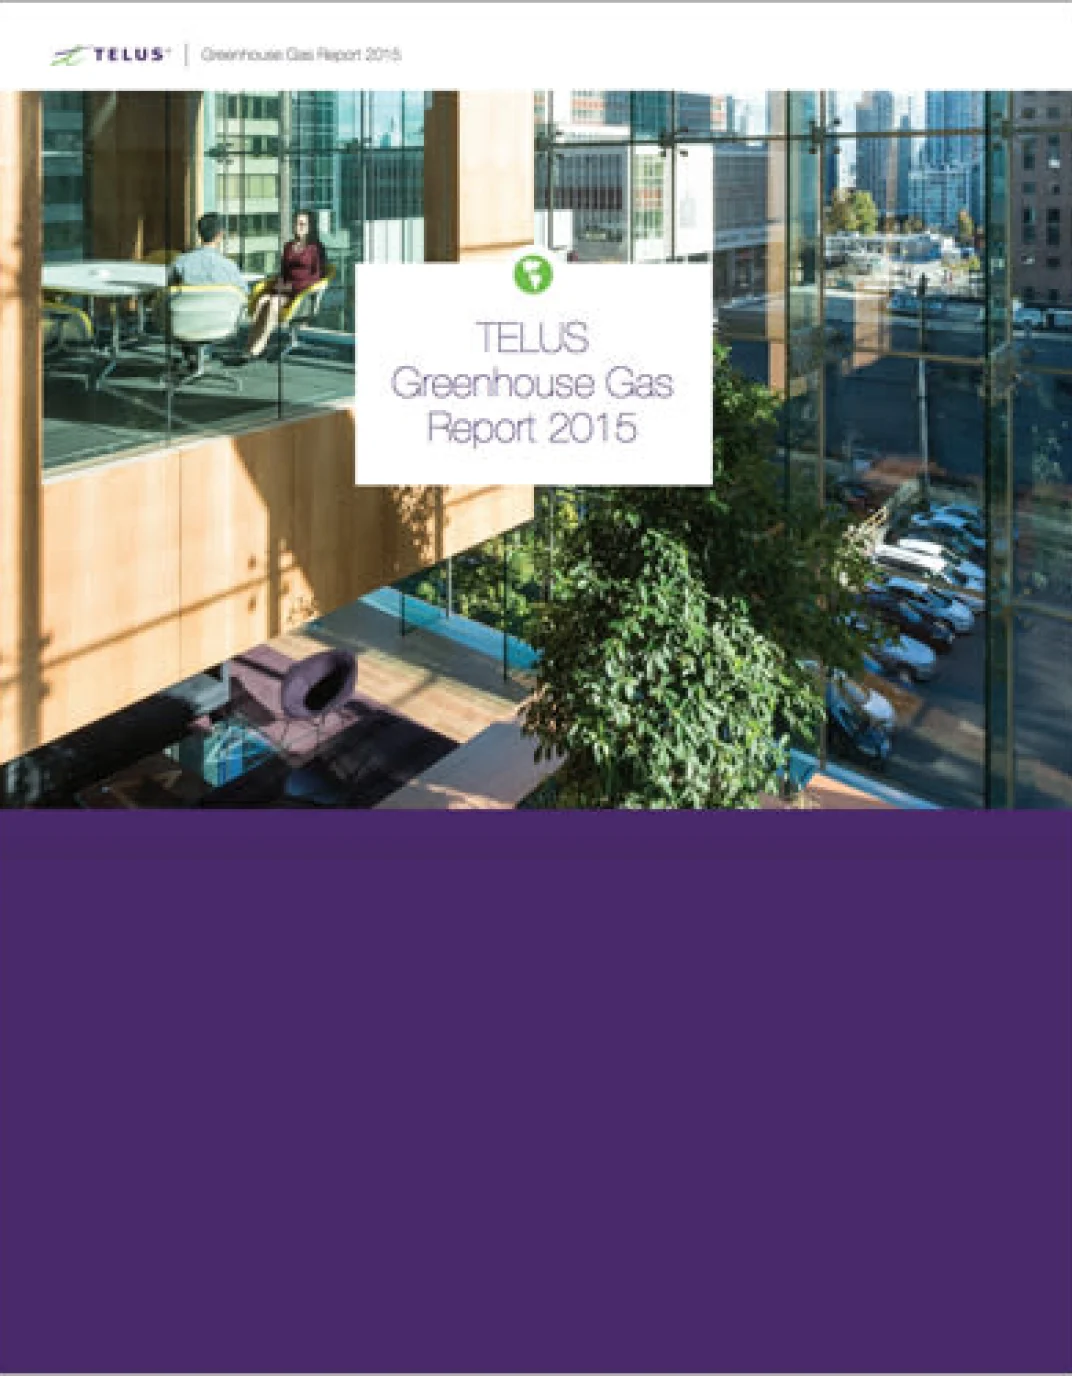 The cover of the 2015 GHG Report